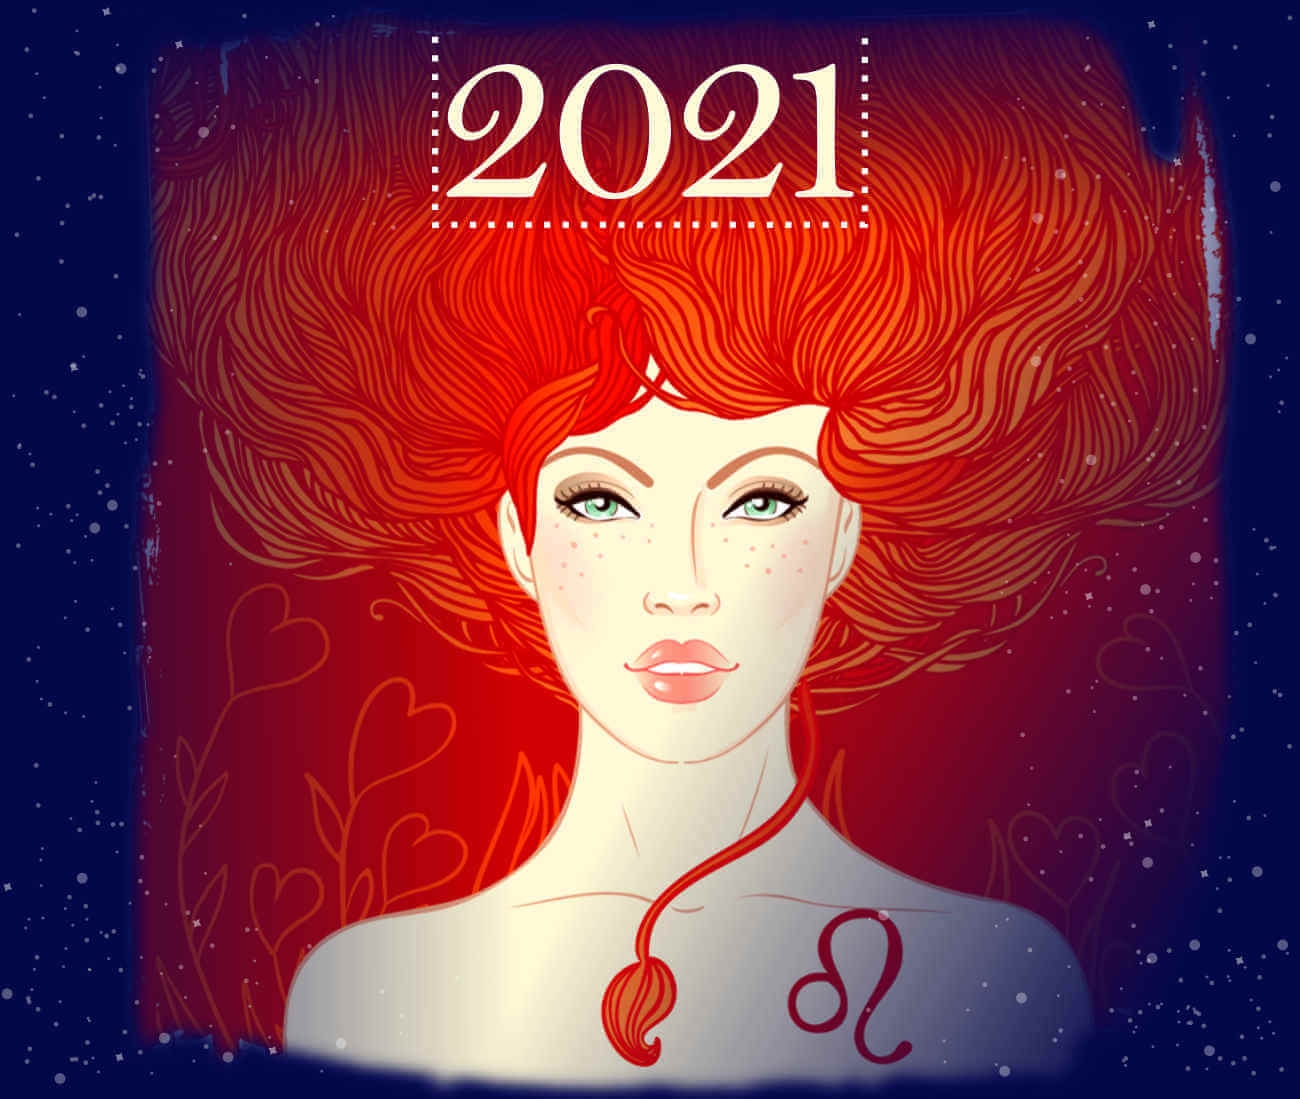 2406 leo tarot reading 2021 yearly horoscope and predictions for all zodiac signs 3